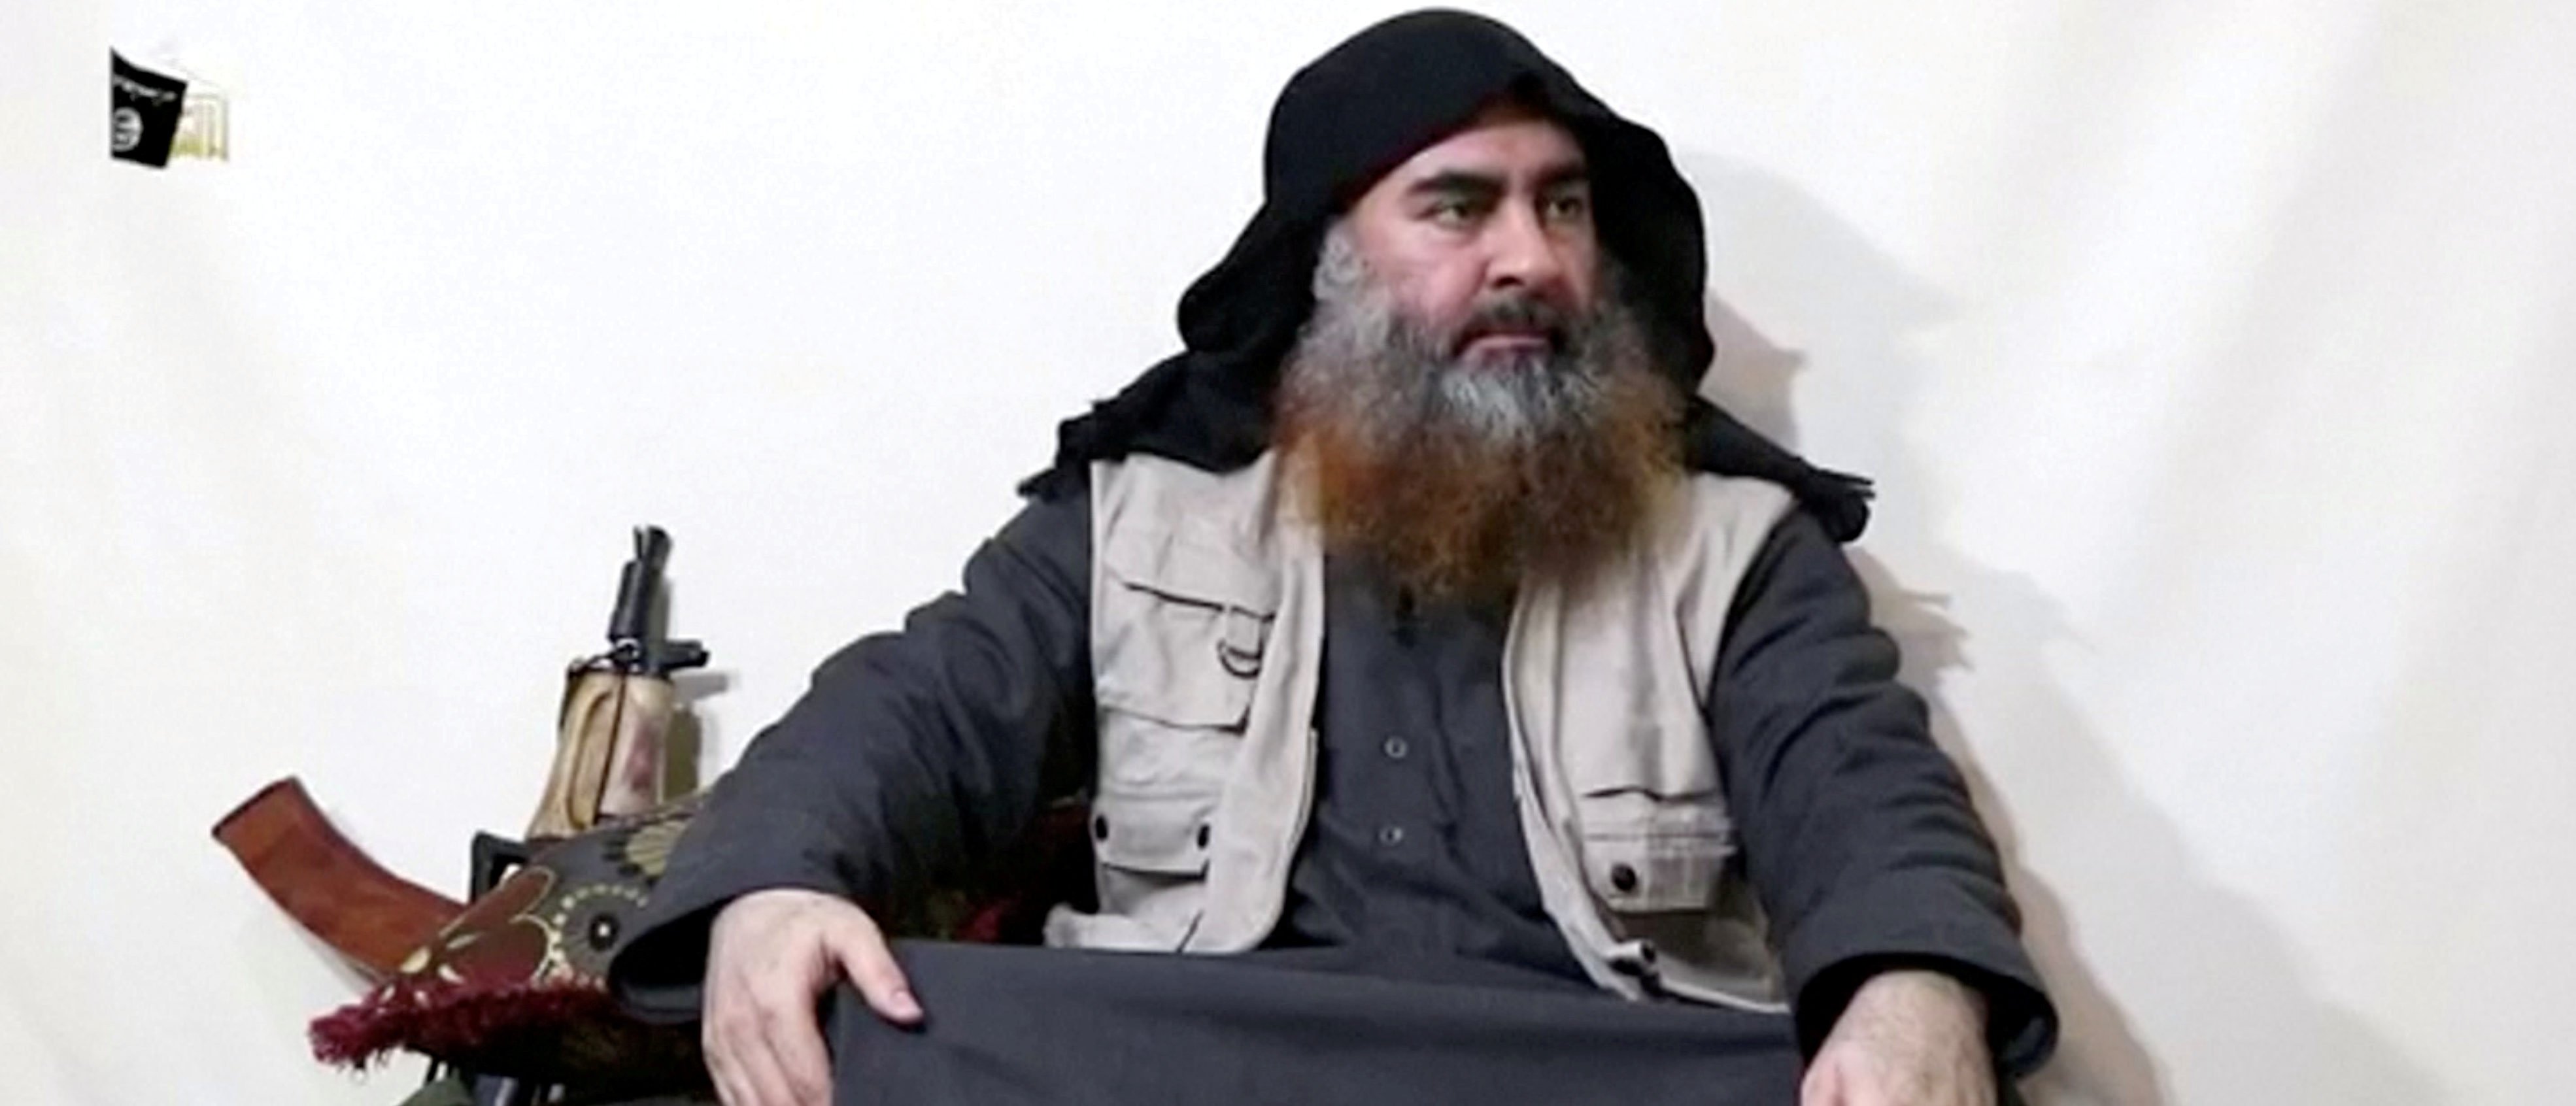 A bearded man with Islamic State leader Abu Bakr al-Baghdadi's appearance speaks in this screen grab taken from video released on April 29, 2019. (Islamic State Group/Al Furqan Media Network/Reuters TV via REUTERS)